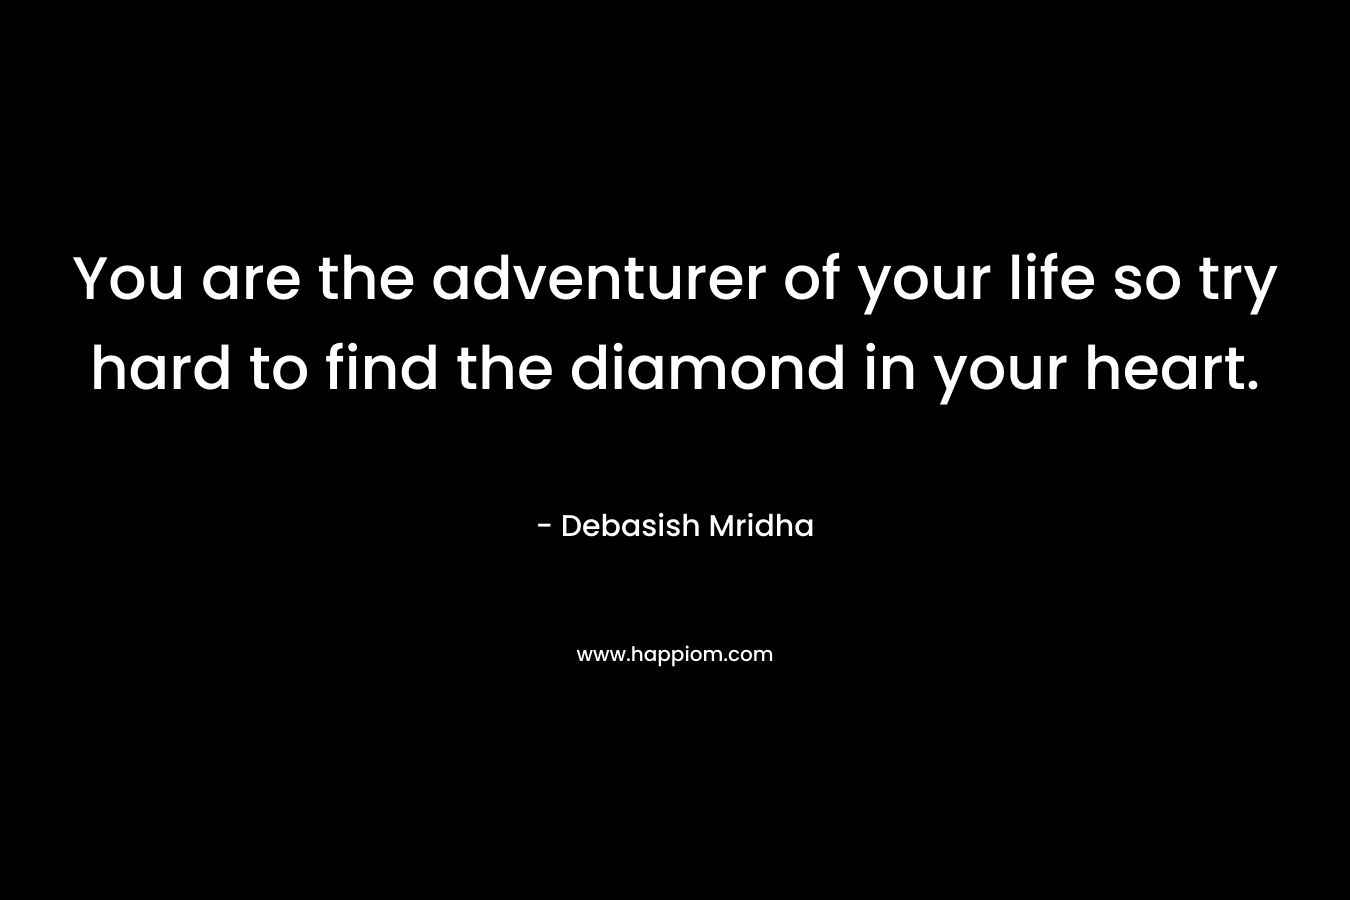 You are the adventurer of your life so try hard to find the diamond in your heart. – Debasish Mridha